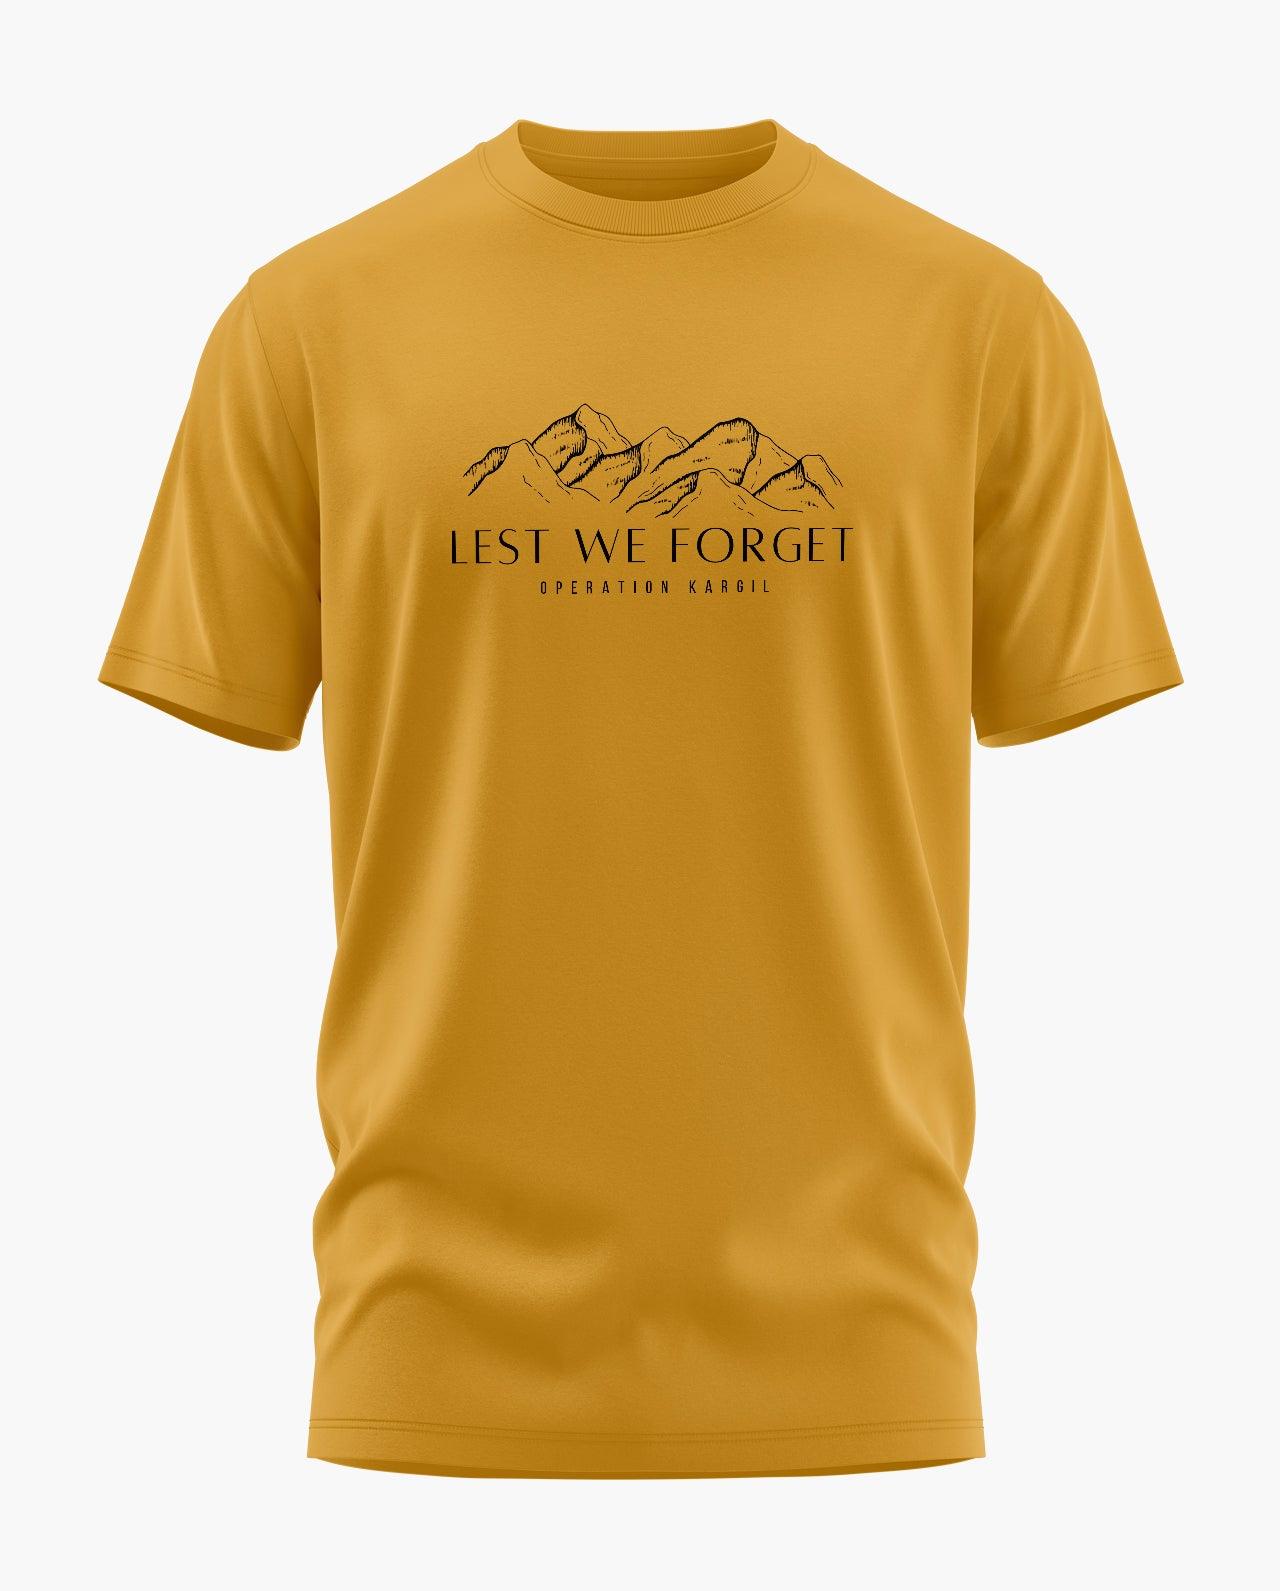 Lest We Forget T-Shirt - Aero Armour